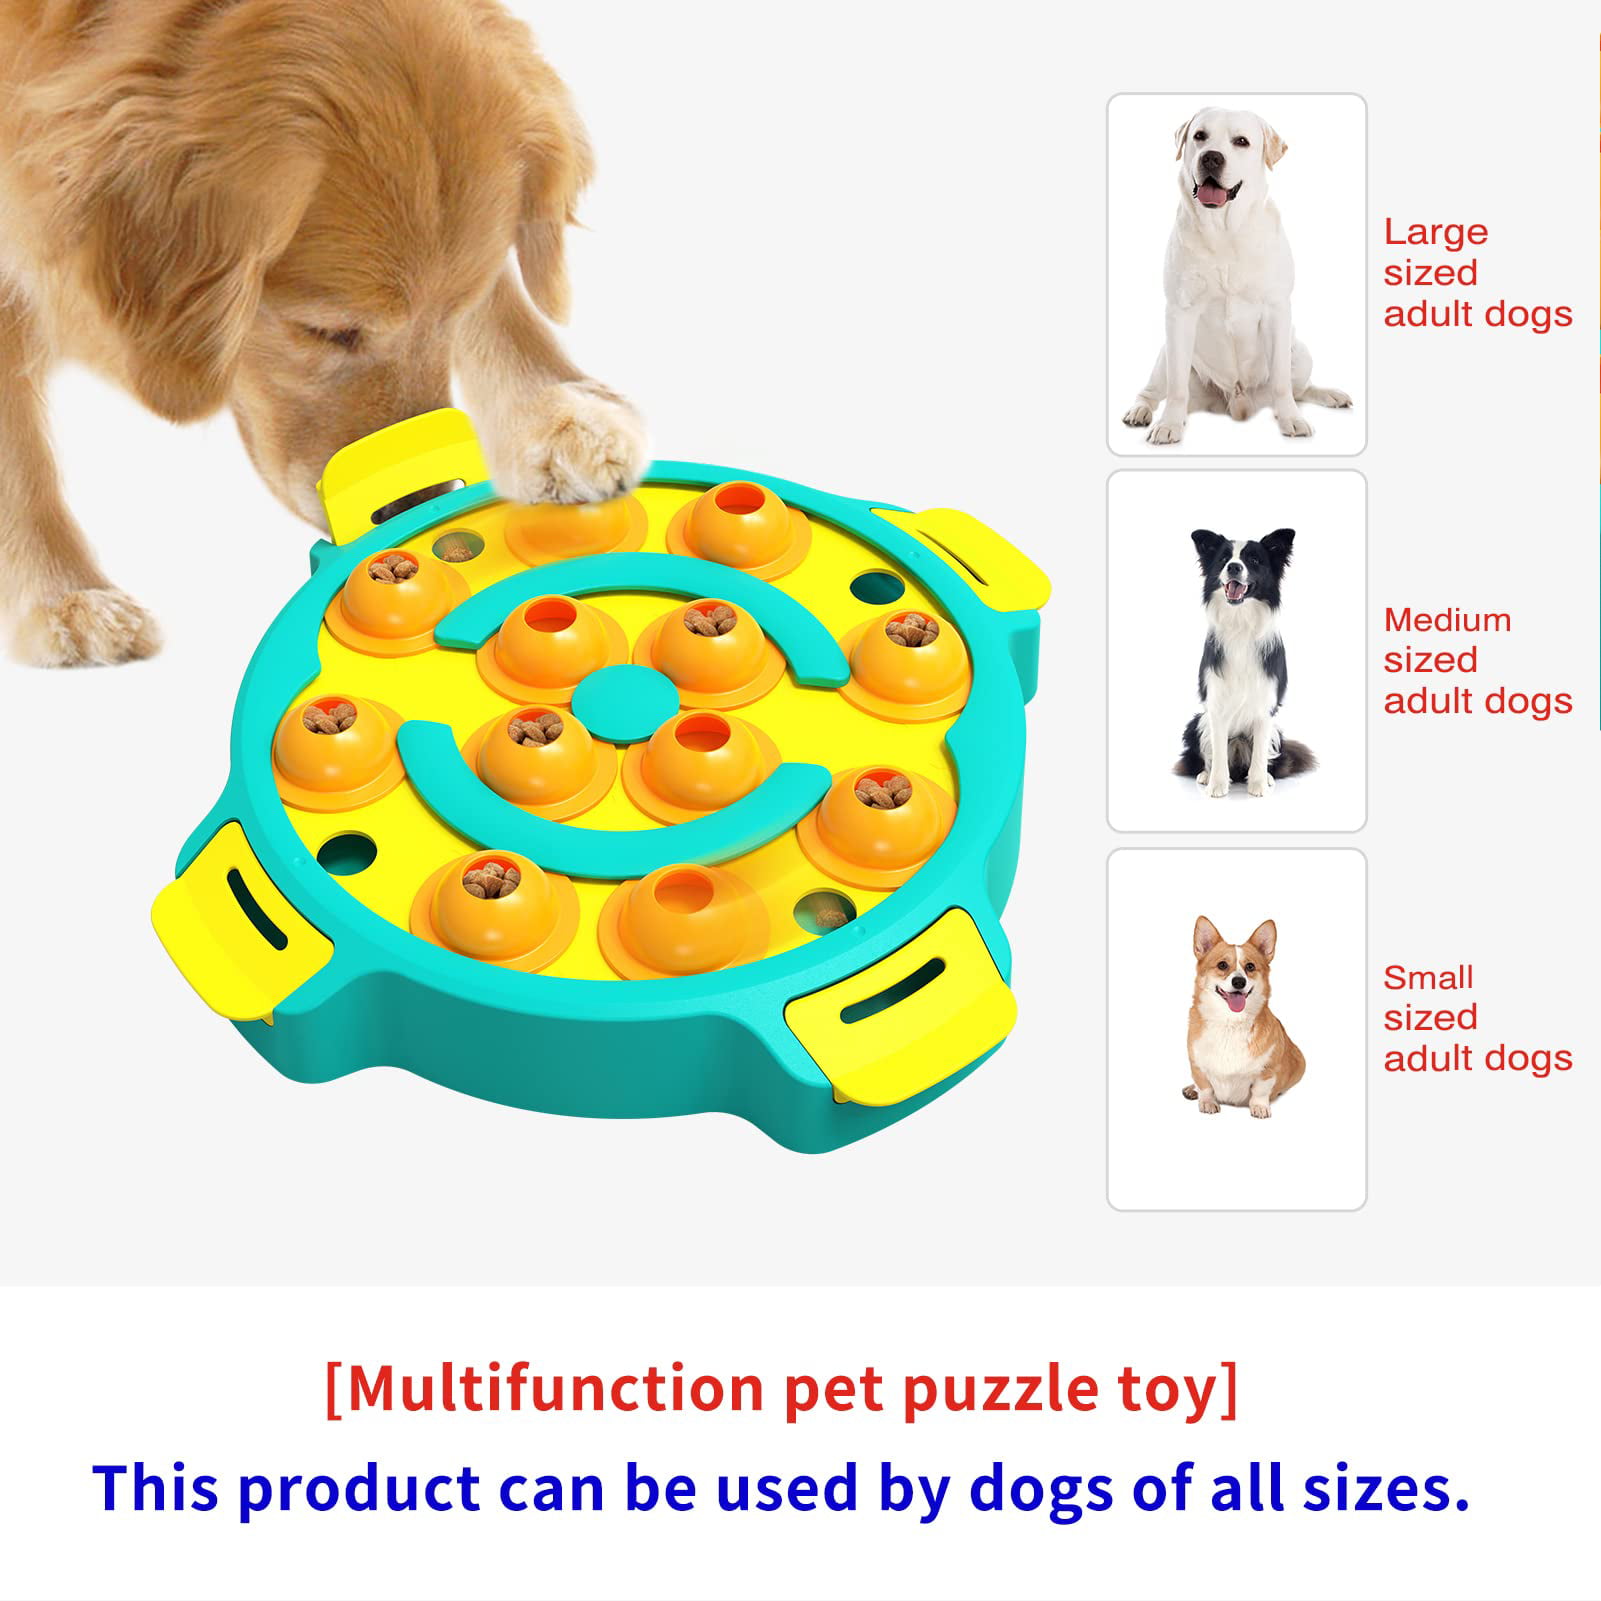  AOBOPLE Dog Puzzle Toy,Dog Food Puzzle Feeder Toys for IQ  Training,Treat Puzzle Games for Dogs Advanced Level 2 Interactive Games for  Small/Medium/Large Dogs (Level 1-2) : Toys & Games